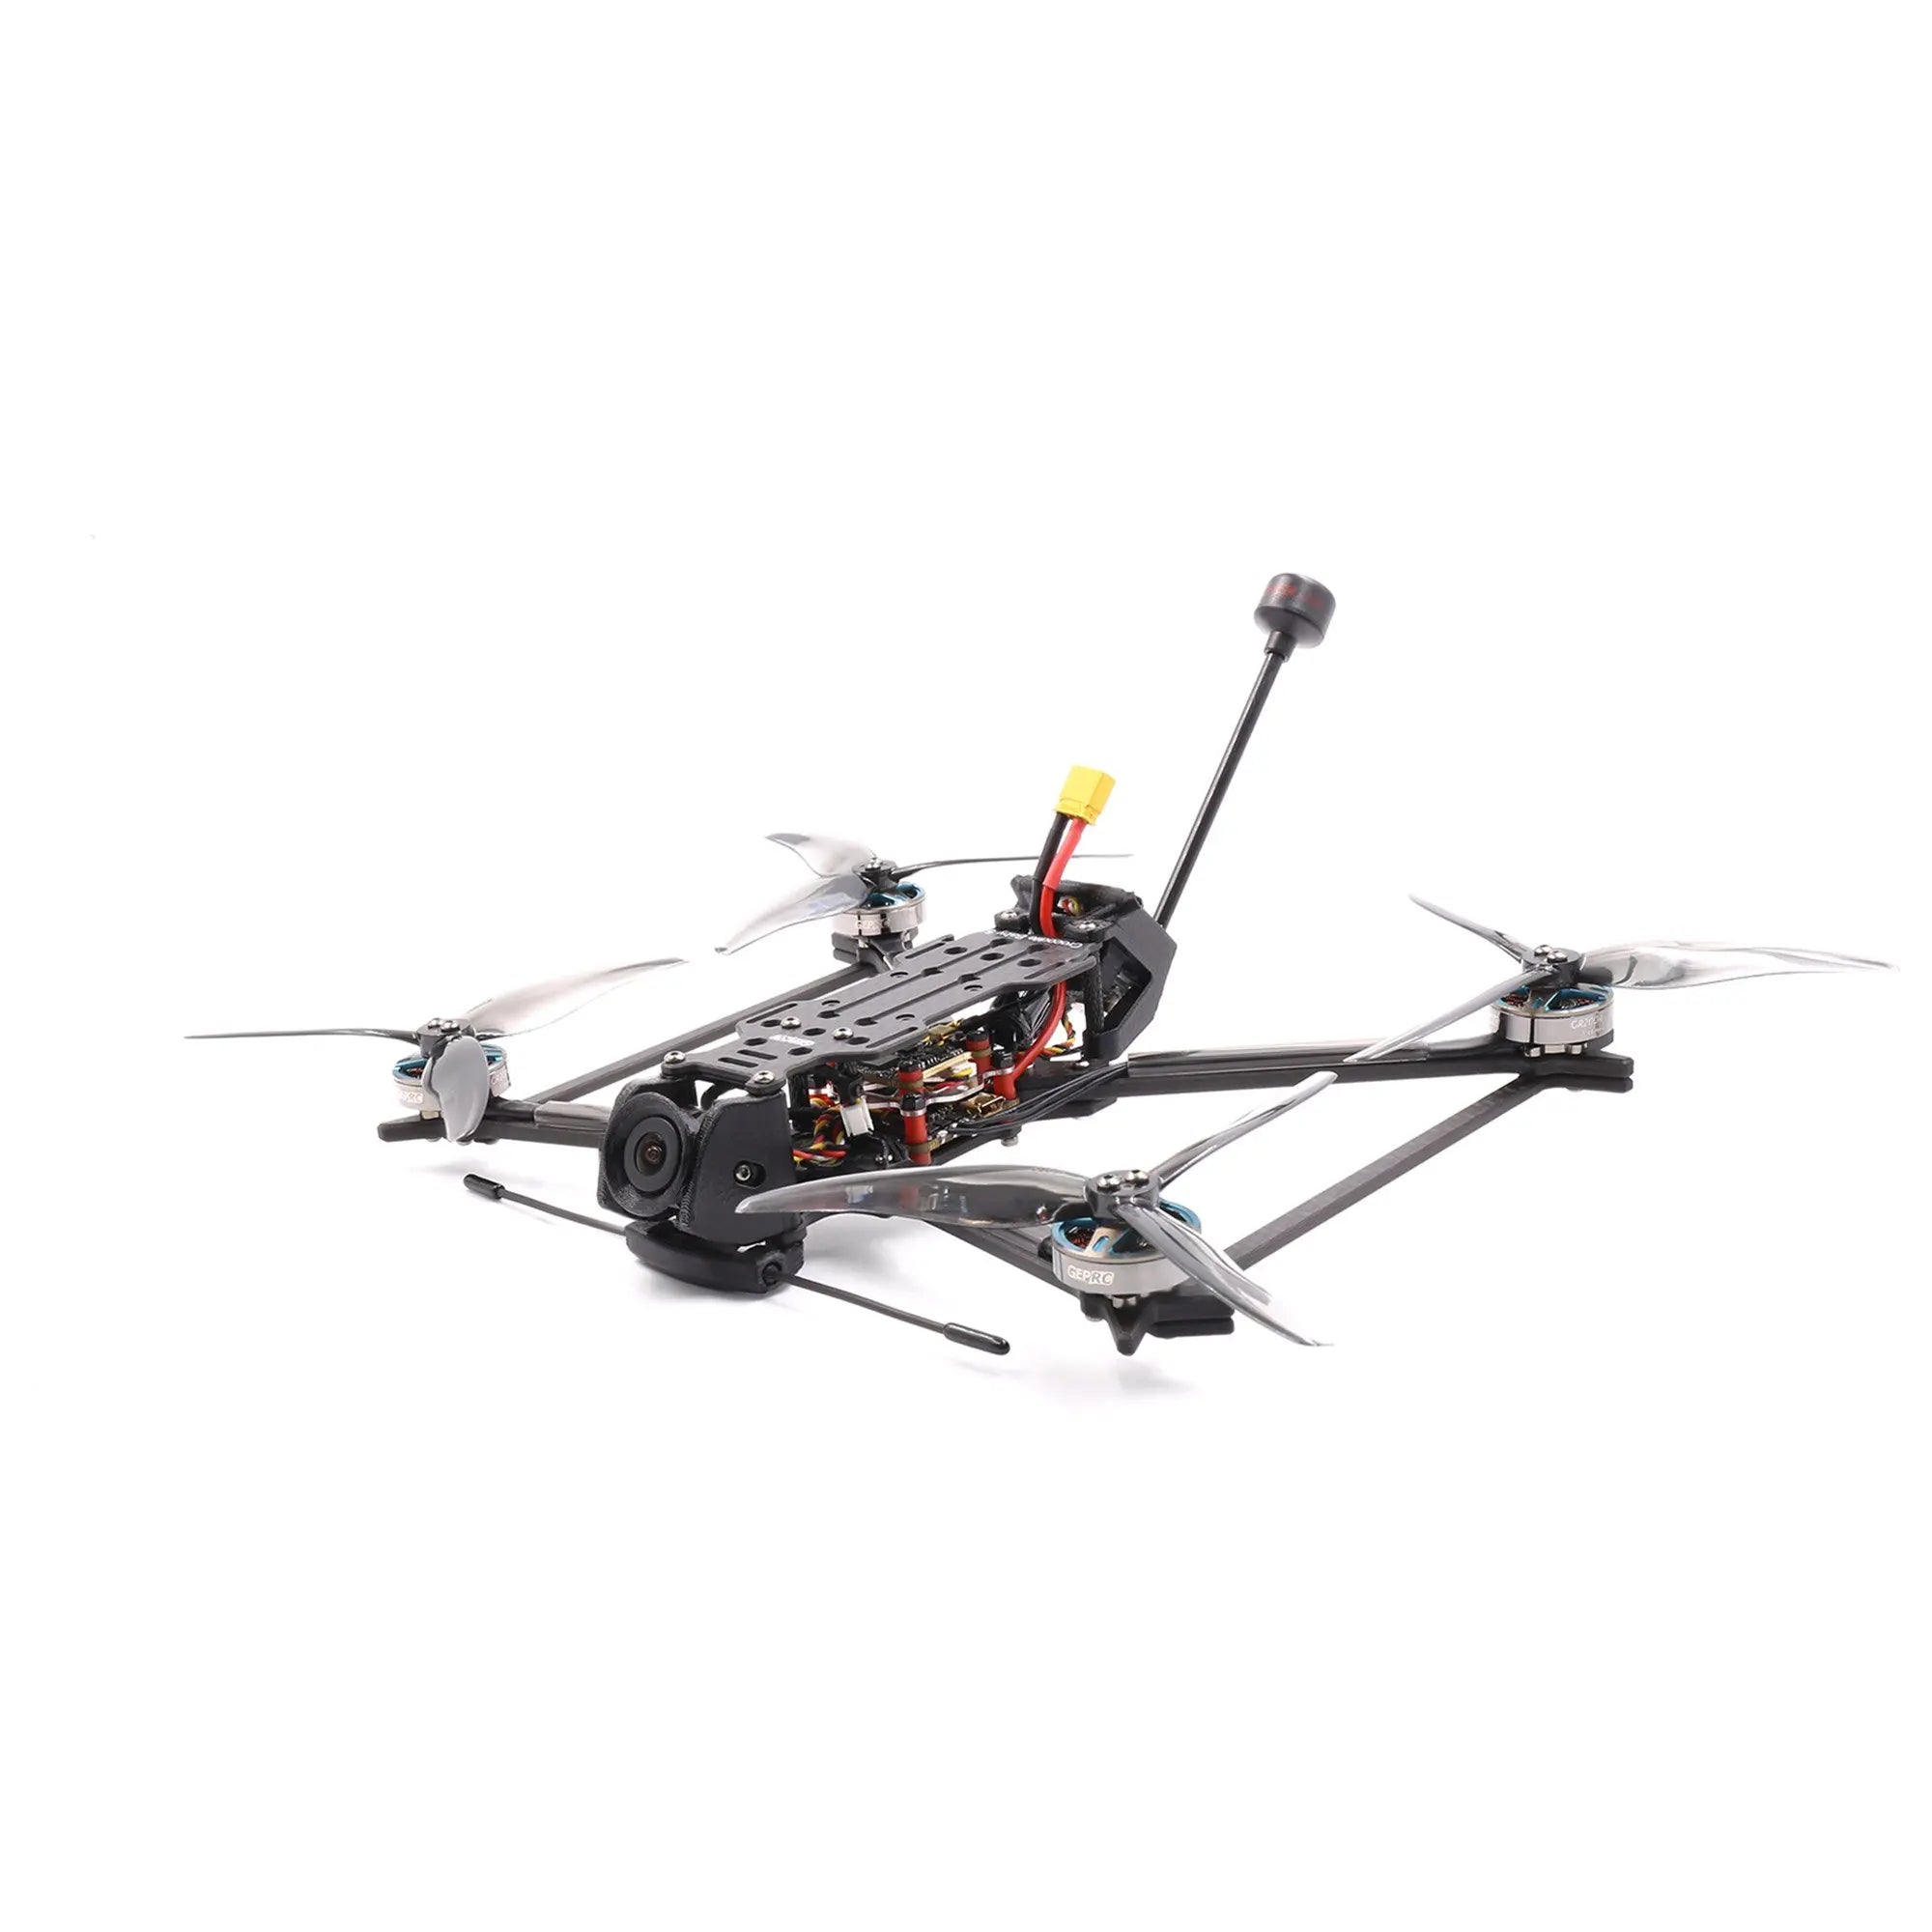 GEPRC Crocodile5 Baby FPV Drone, when signal losing or VTX out of control,it can be start the rescue mode of